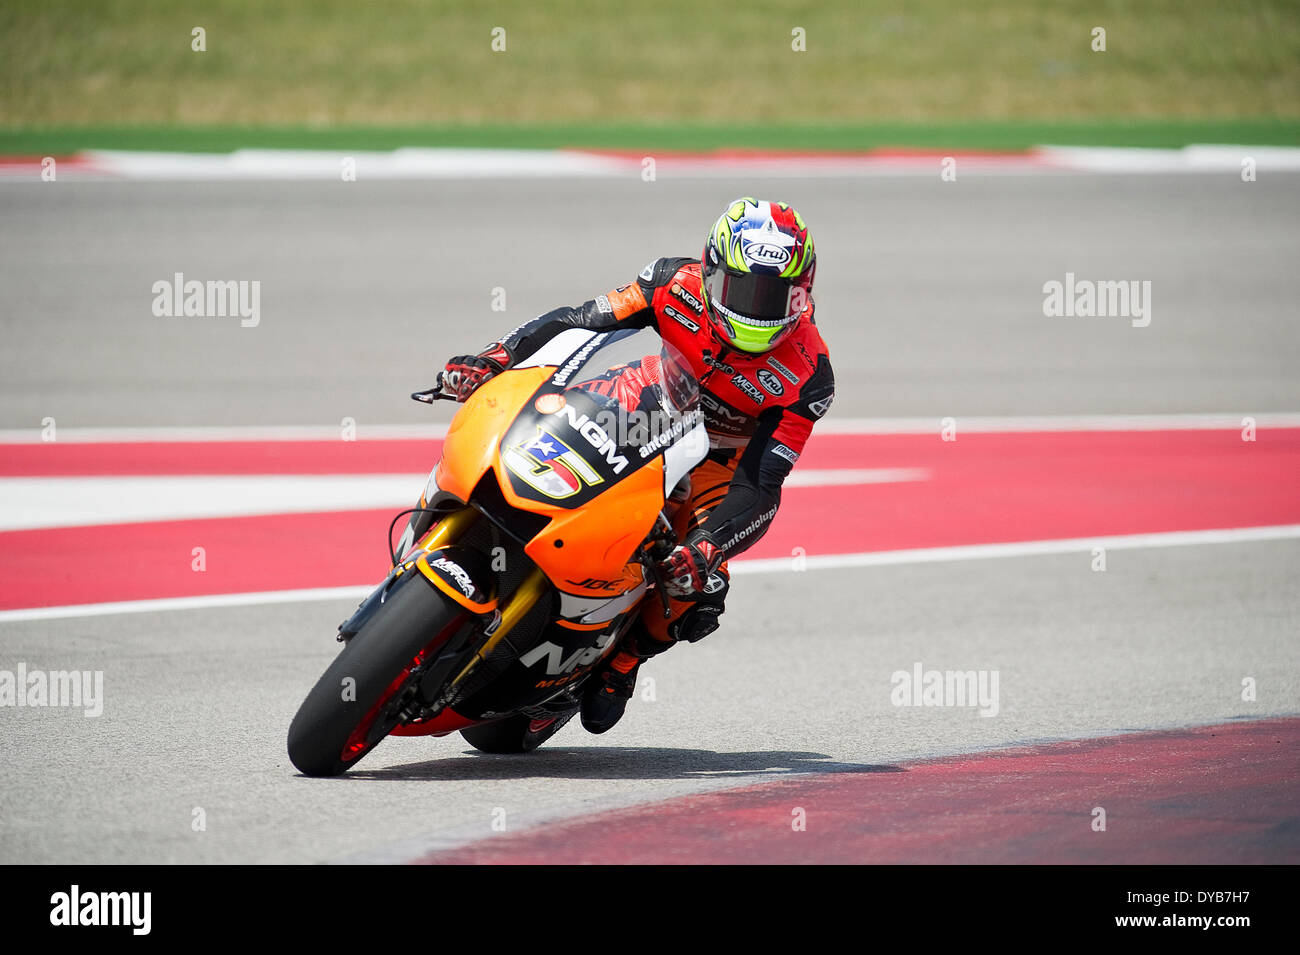 Austin, Texas, USA. 12th Apr, 2014. April 12, 2014: MotoGP Colin Edwards #05 with NGM Forward Racing at the Red Bull Grand Prix of the Americas. Austin, Texas. Credit:  csm/Alamy Live News Stock Photo